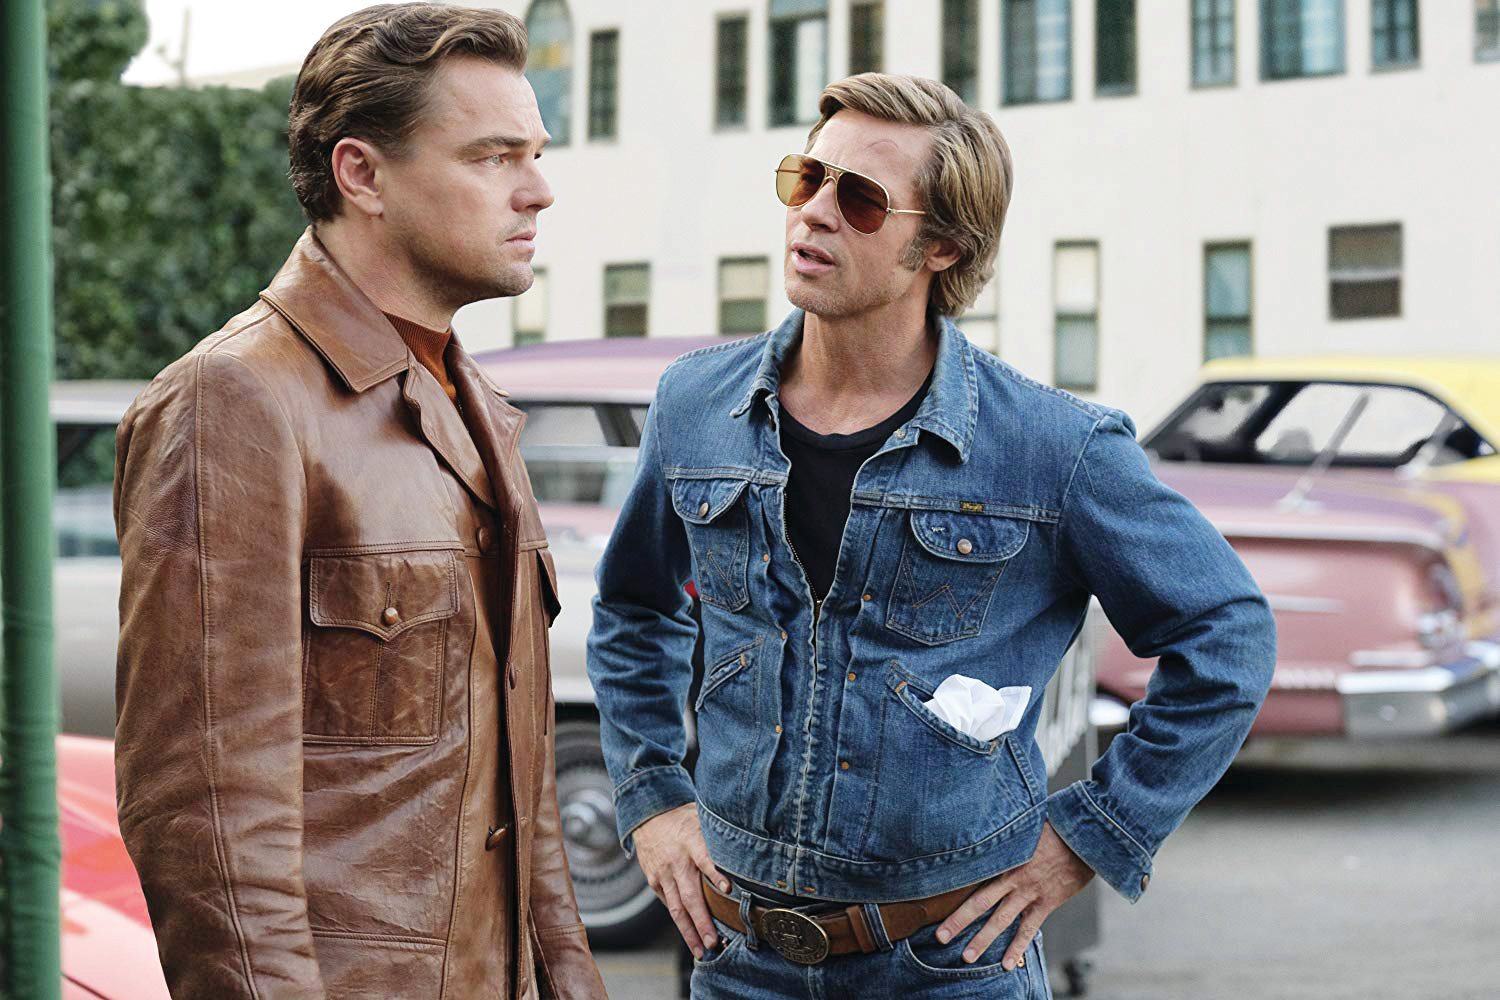 Leonardo DiCaprio (left) and Brad Pitt star in 'Once Upon a Time...in Hollywood.'